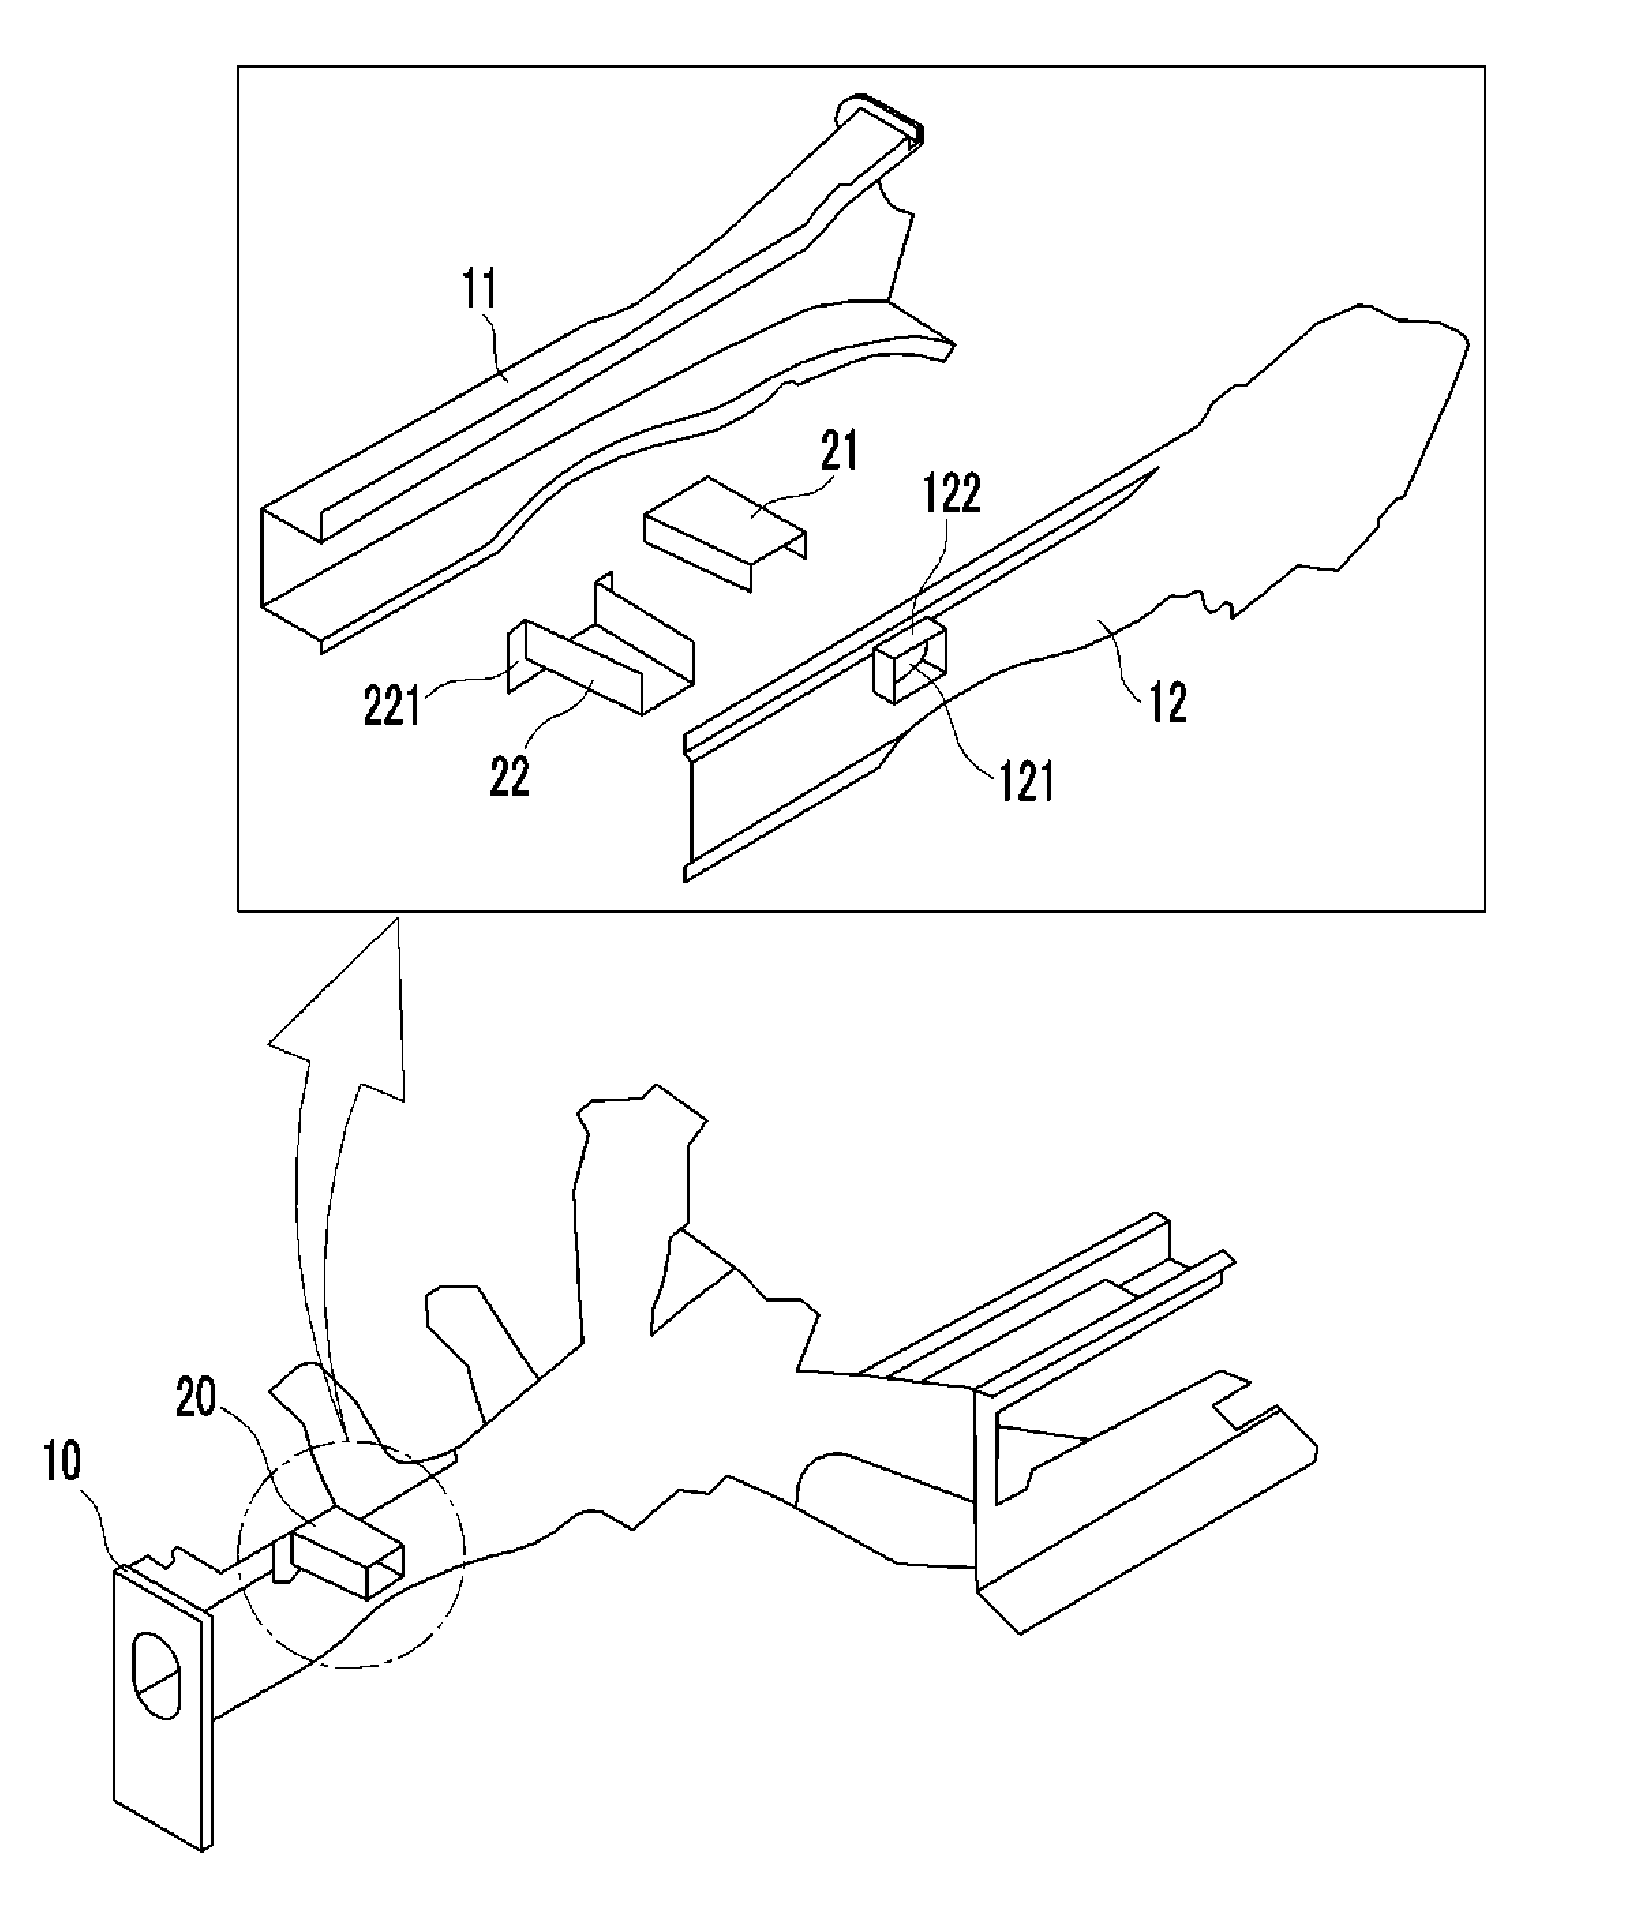 Reinforcing unit for vehicle body